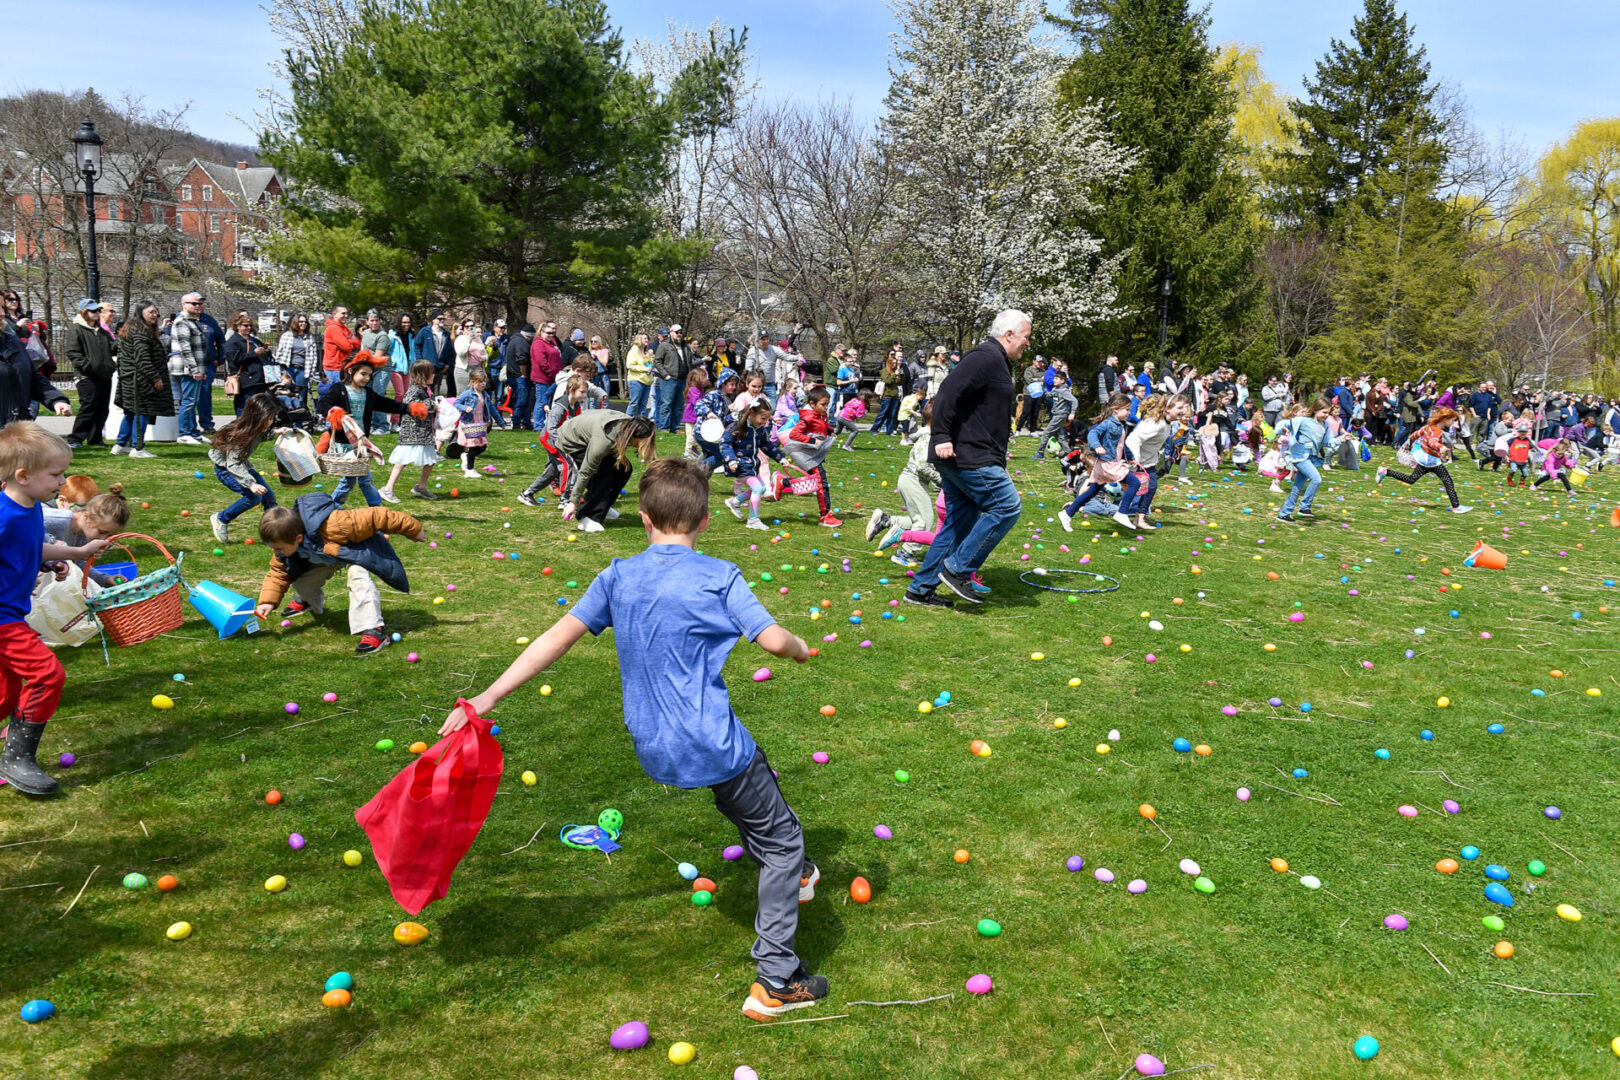 Invoice for Bellefonte Easter Egg Hunt Stirs Controversy State